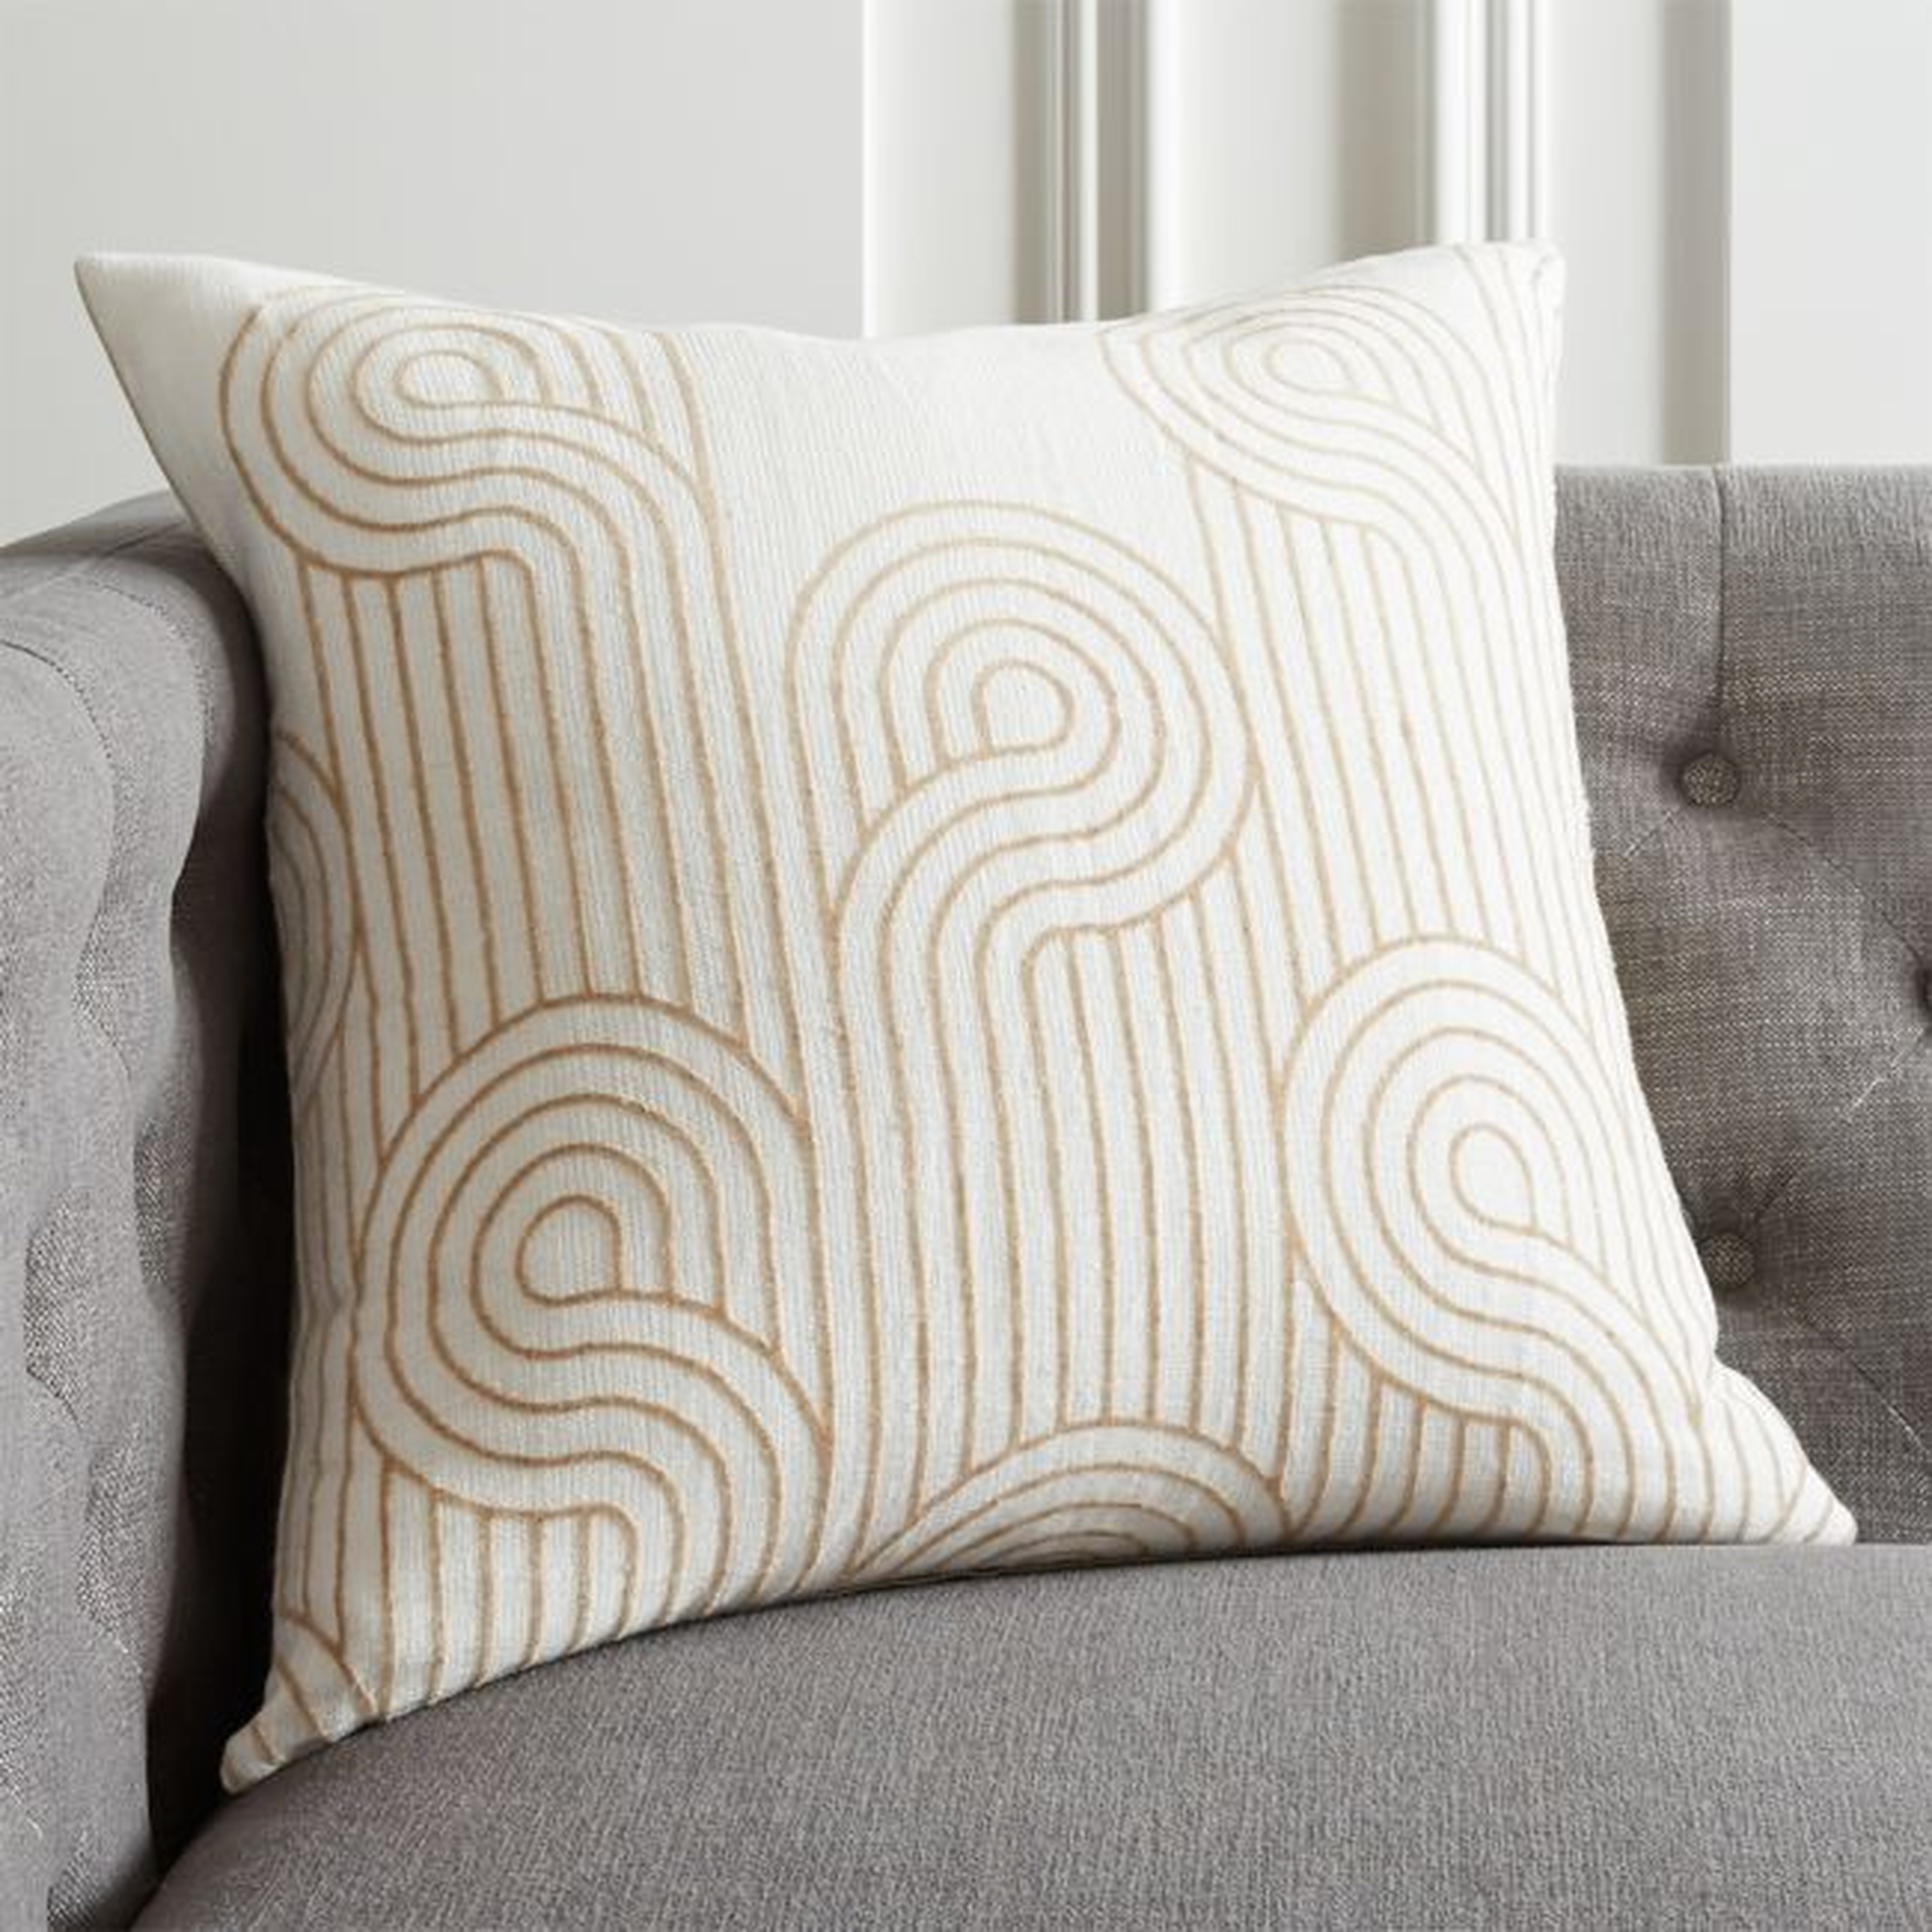 20" Swirls Pillow with Feather-Down Insert - CB2